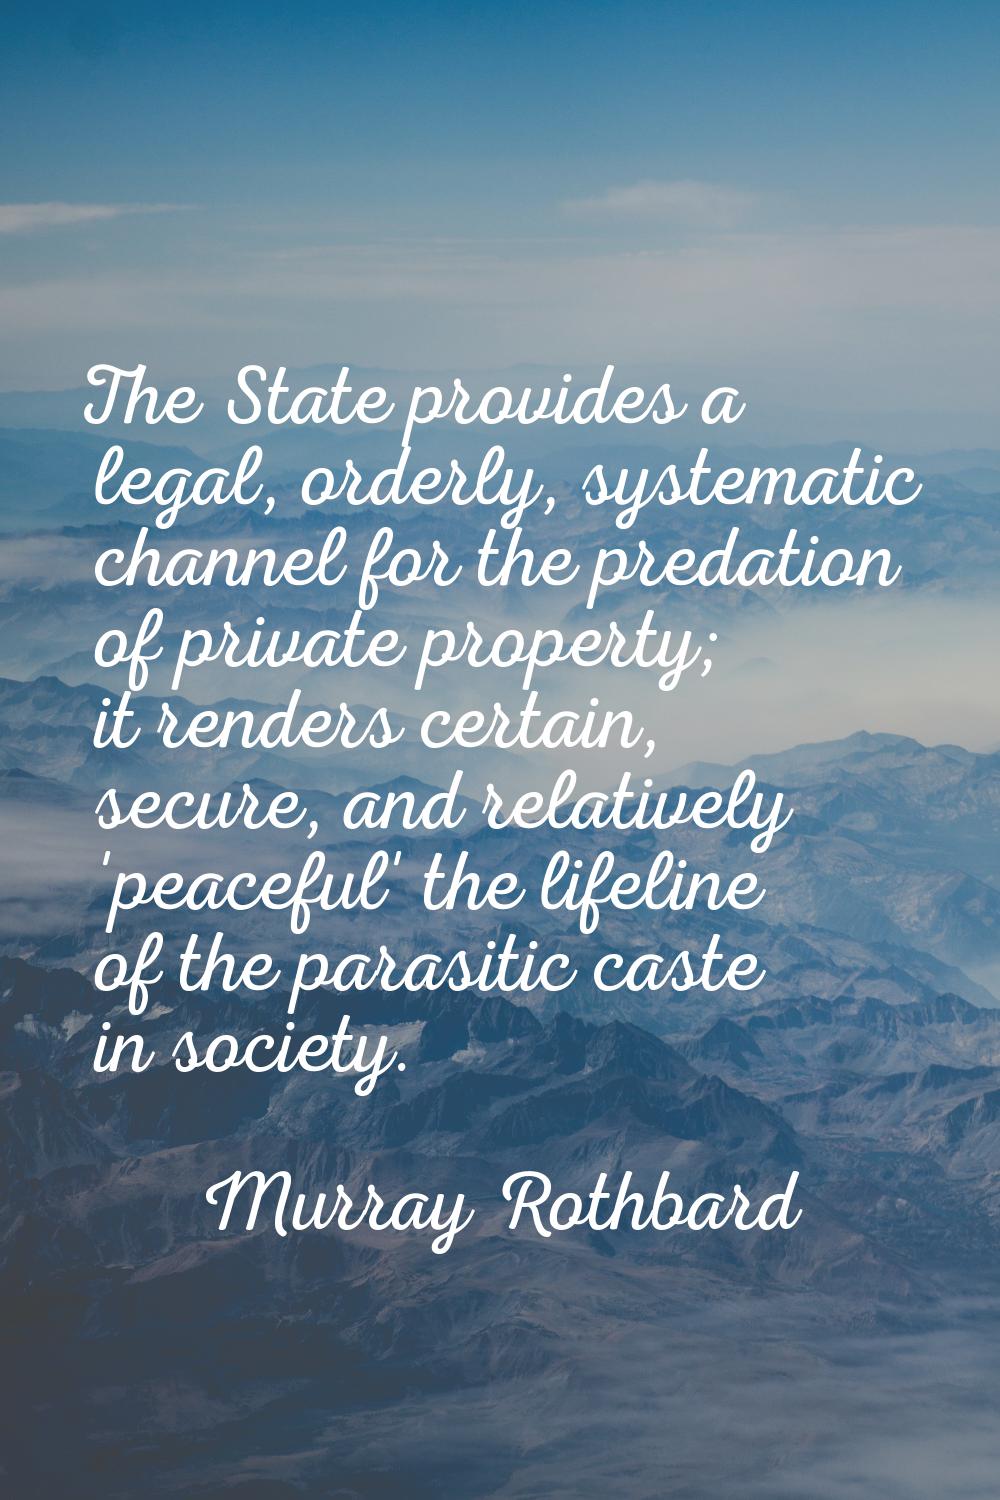 The State provides a legal, orderly, systematic channel for the predation of private property; it r